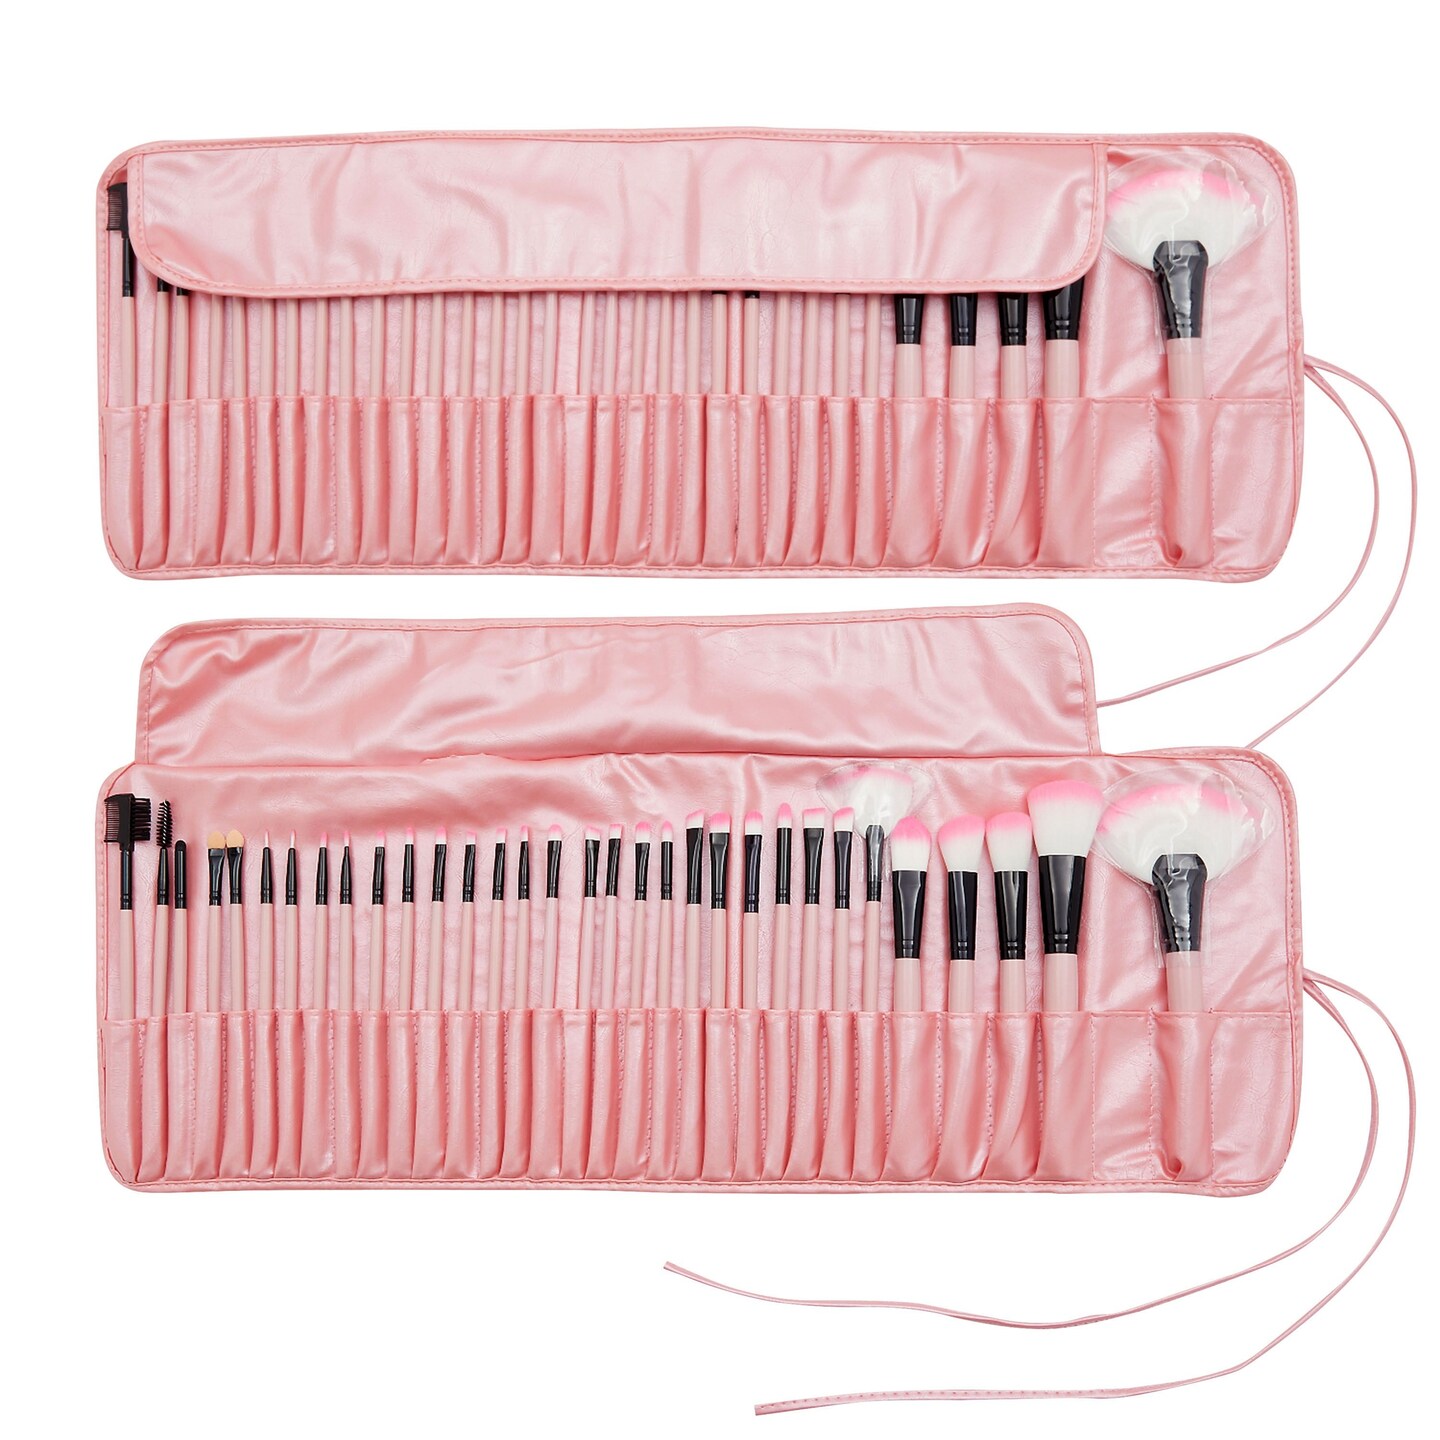 32 Piece Professional Makeup Brush Set with Storage Case Pouch, Pink